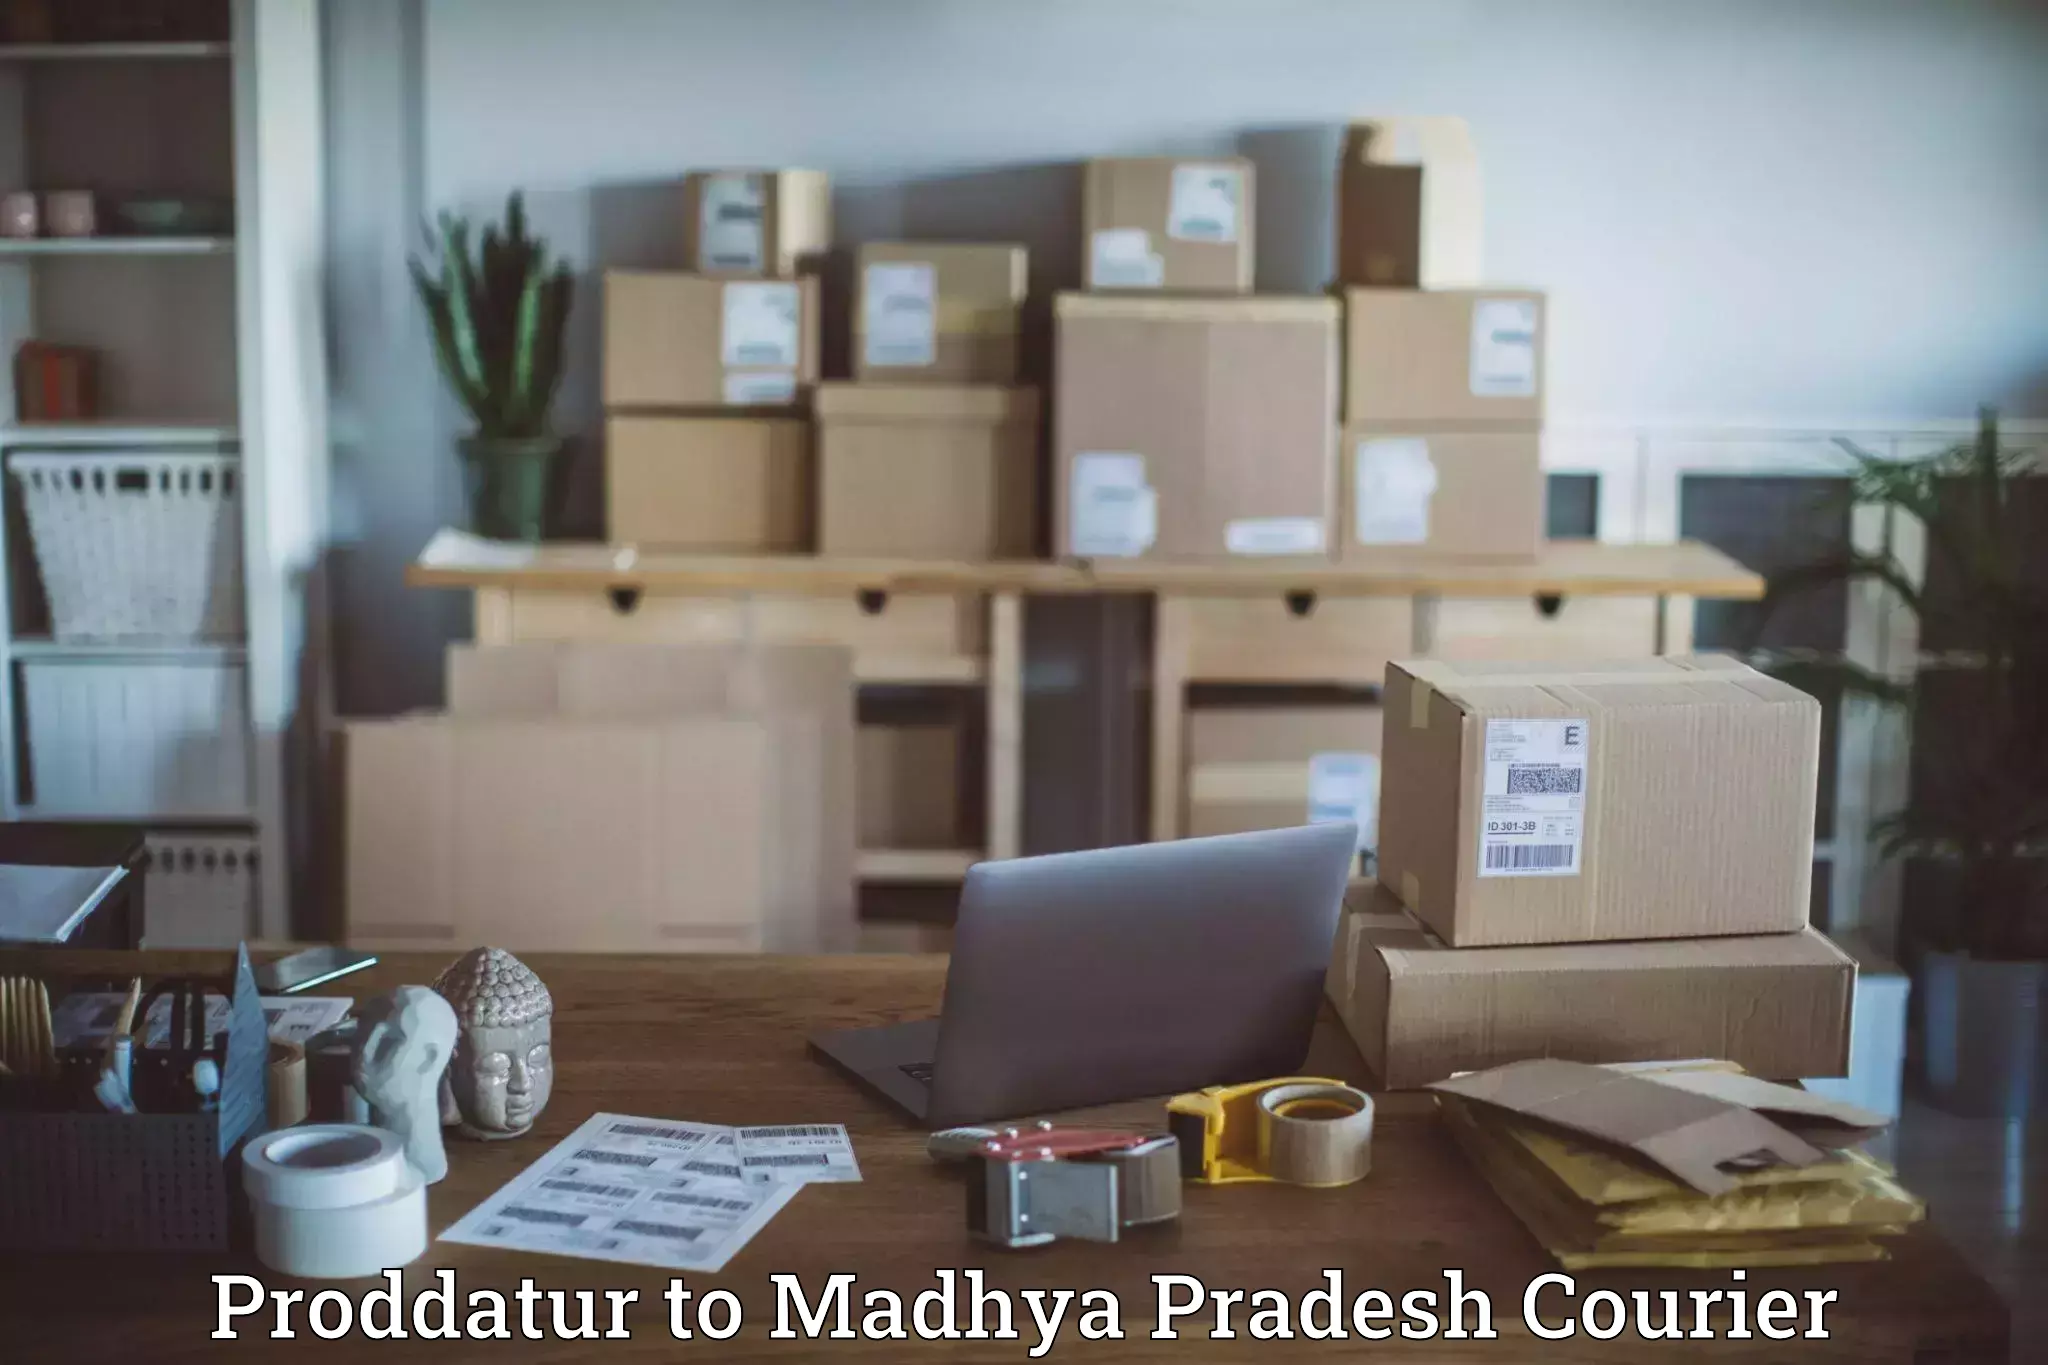 Global parcel delivery Proddatur to IIIT Bhopal